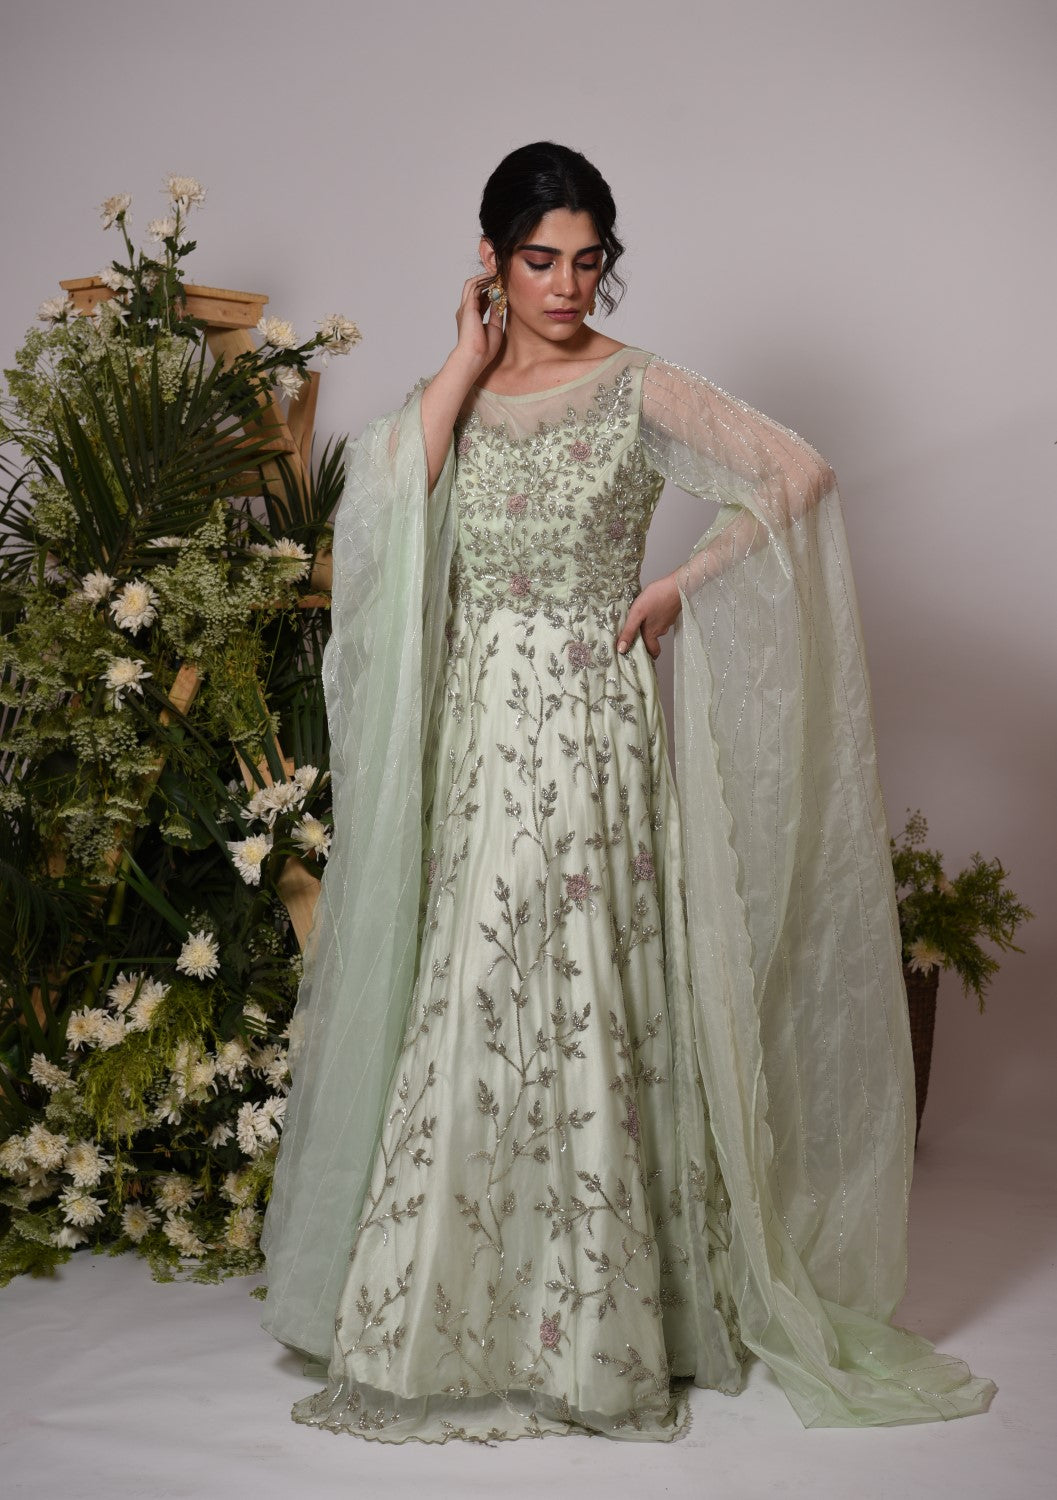 Mint green trailing sleeves gown